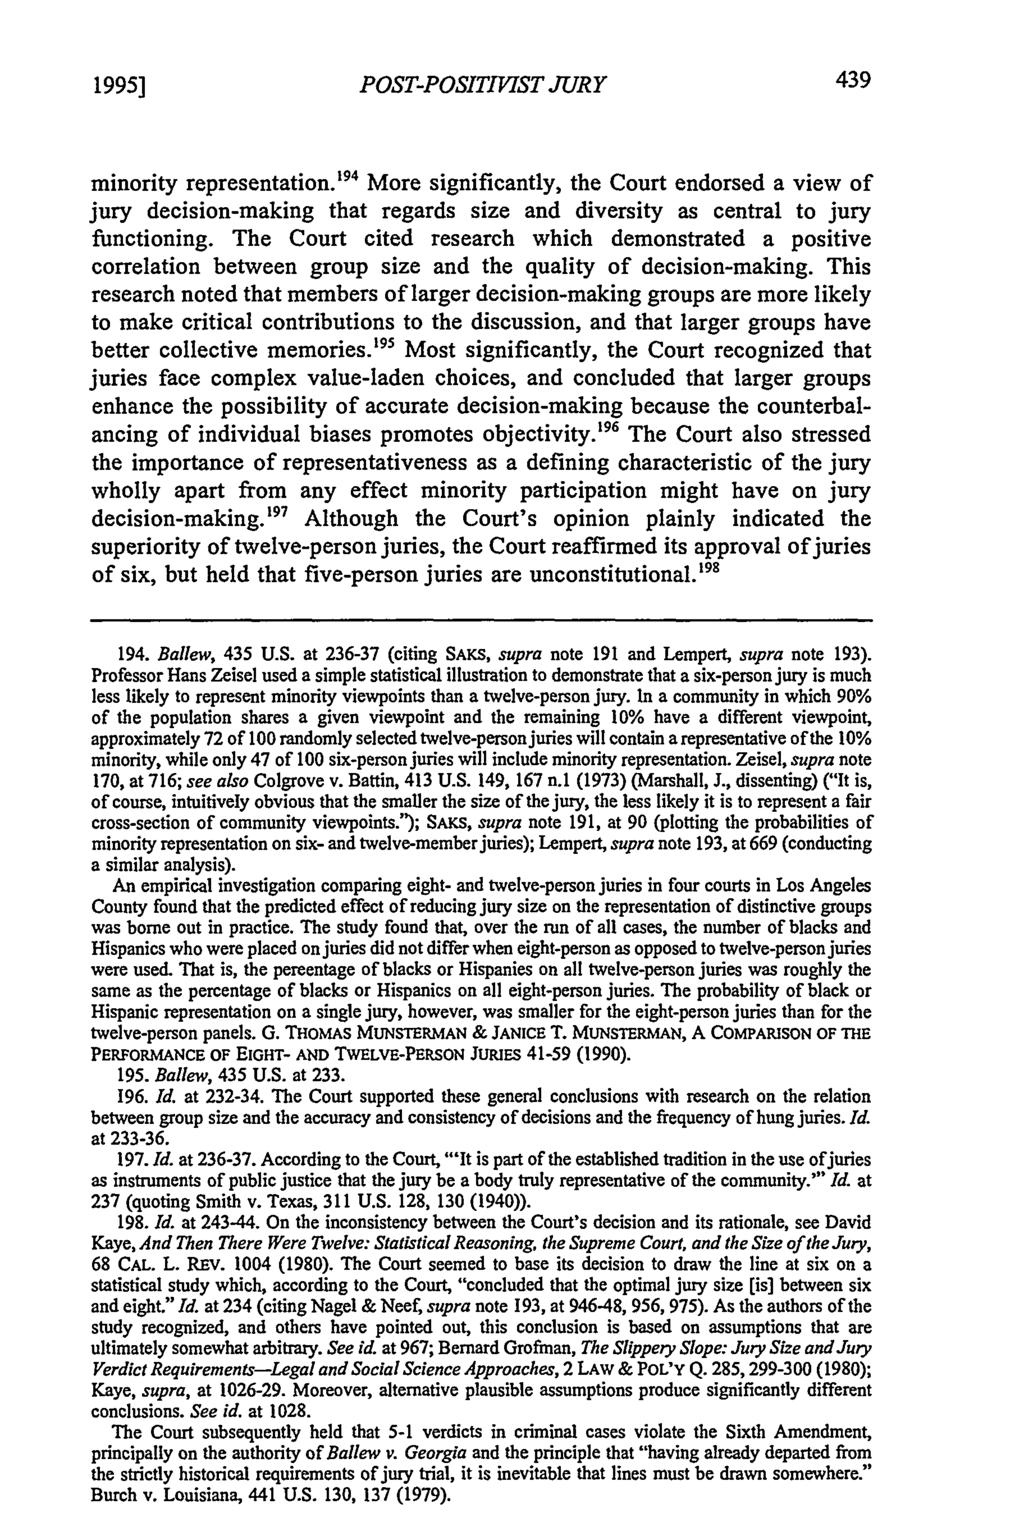 1995] POST-POSITIIST JURY minority representation. 94 More significantly, the Court endorsed a view of jury decision-making that regards size and diversity as central to jury functioning.